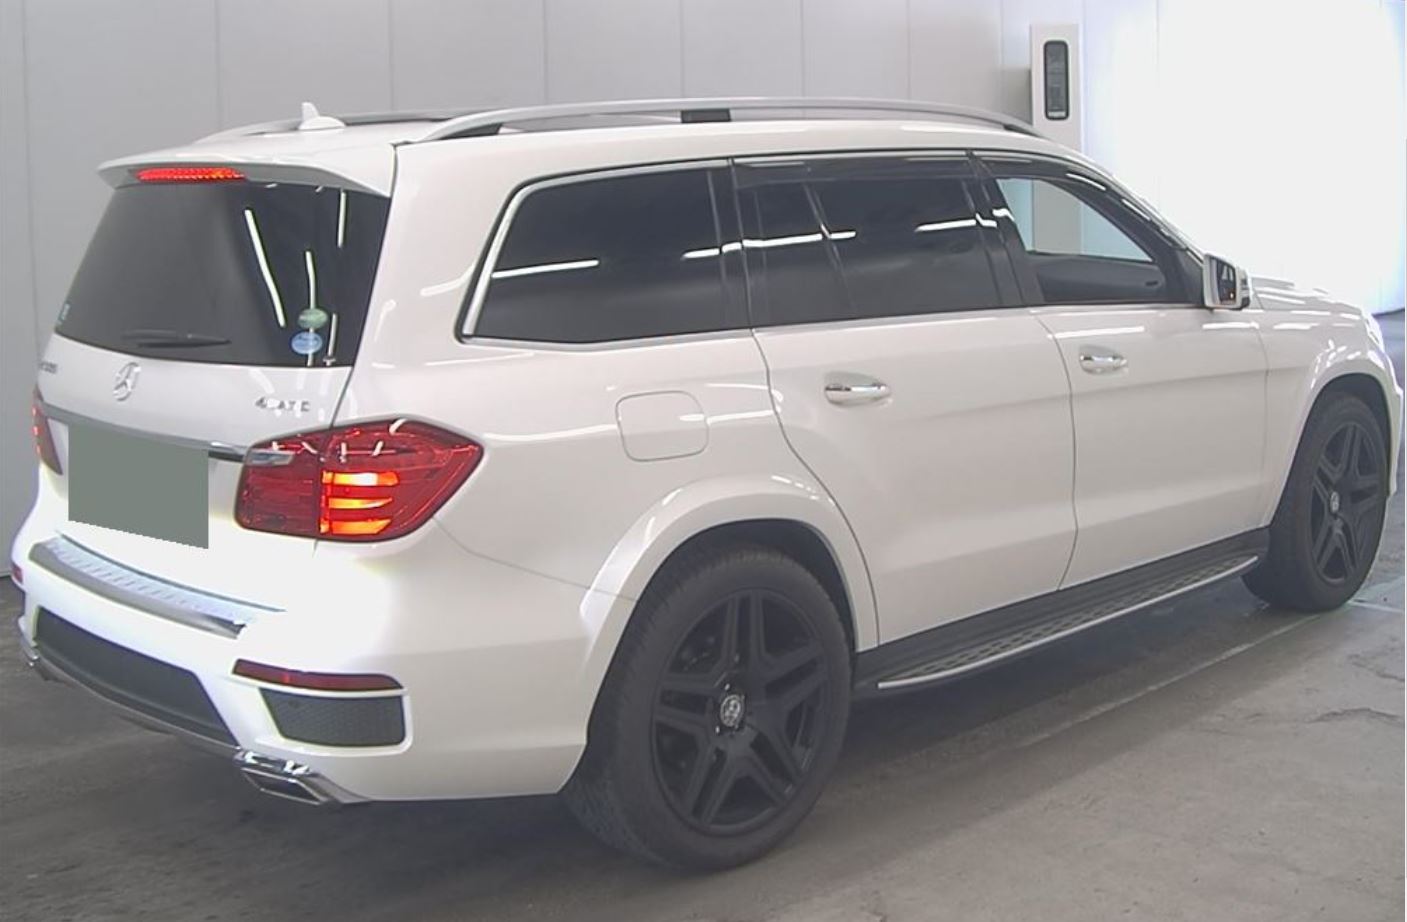 Mercedes Benz GL550 AMG Exclusive Package (photo: 3)